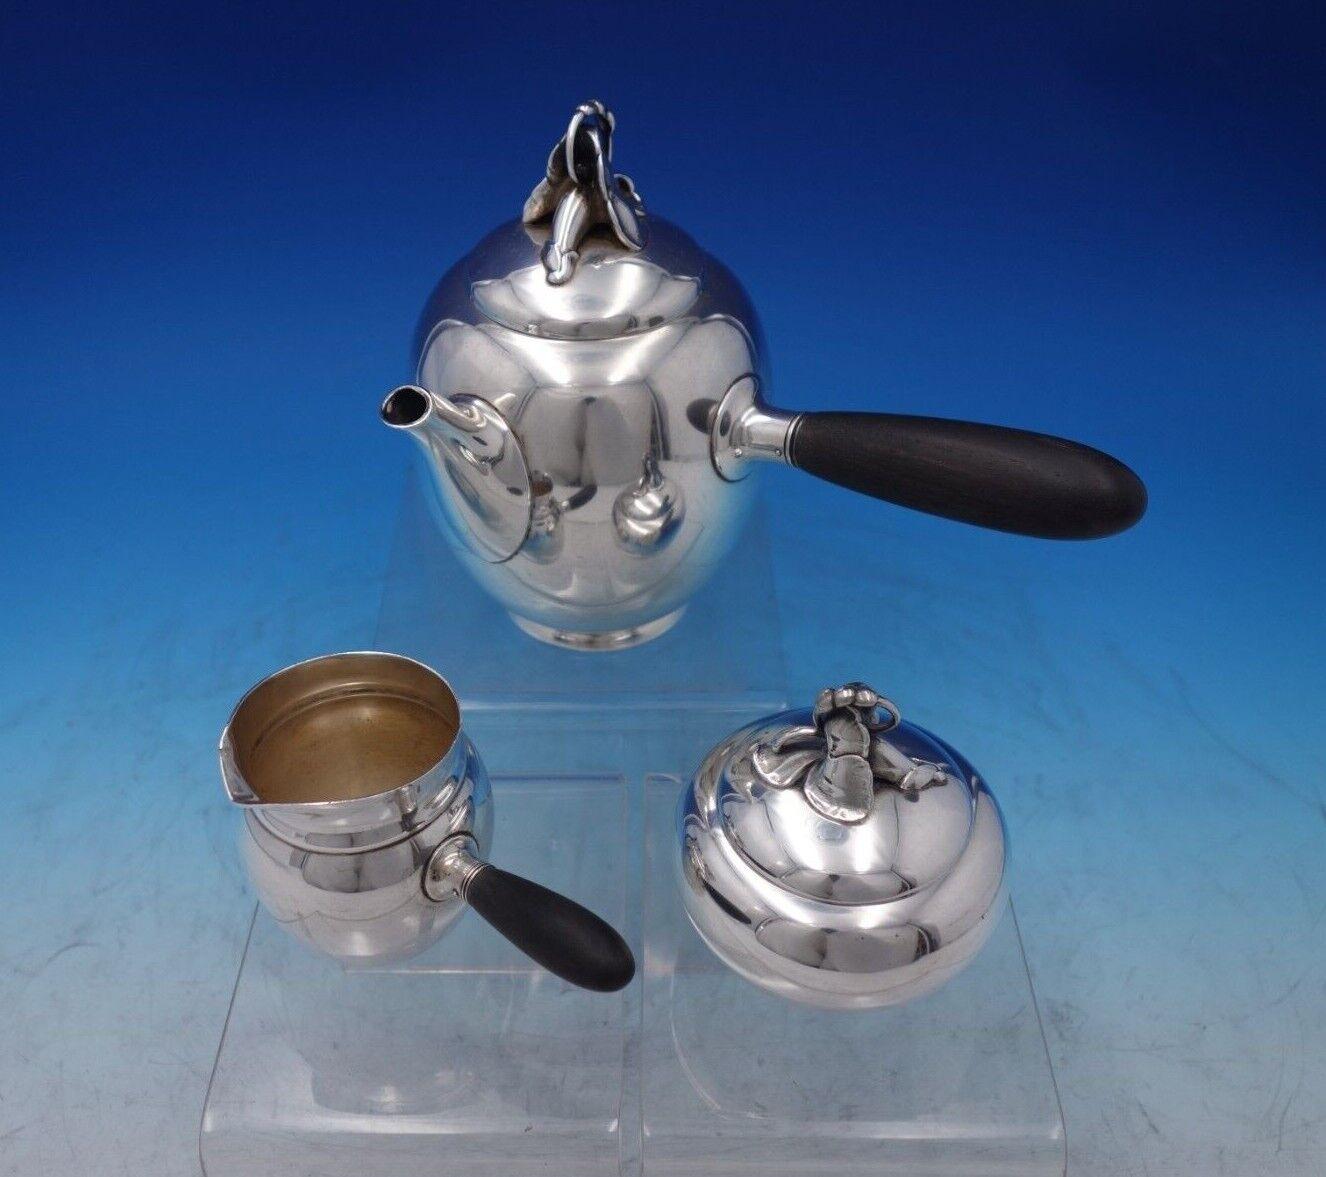 Pansy by Gorham

Spectacular Pansy by Gorham sterling silver three-piece coffee set. This set includes:

1 - Coffee Pot (with ebony handle): Holds 1 1/2 pints, measures 6